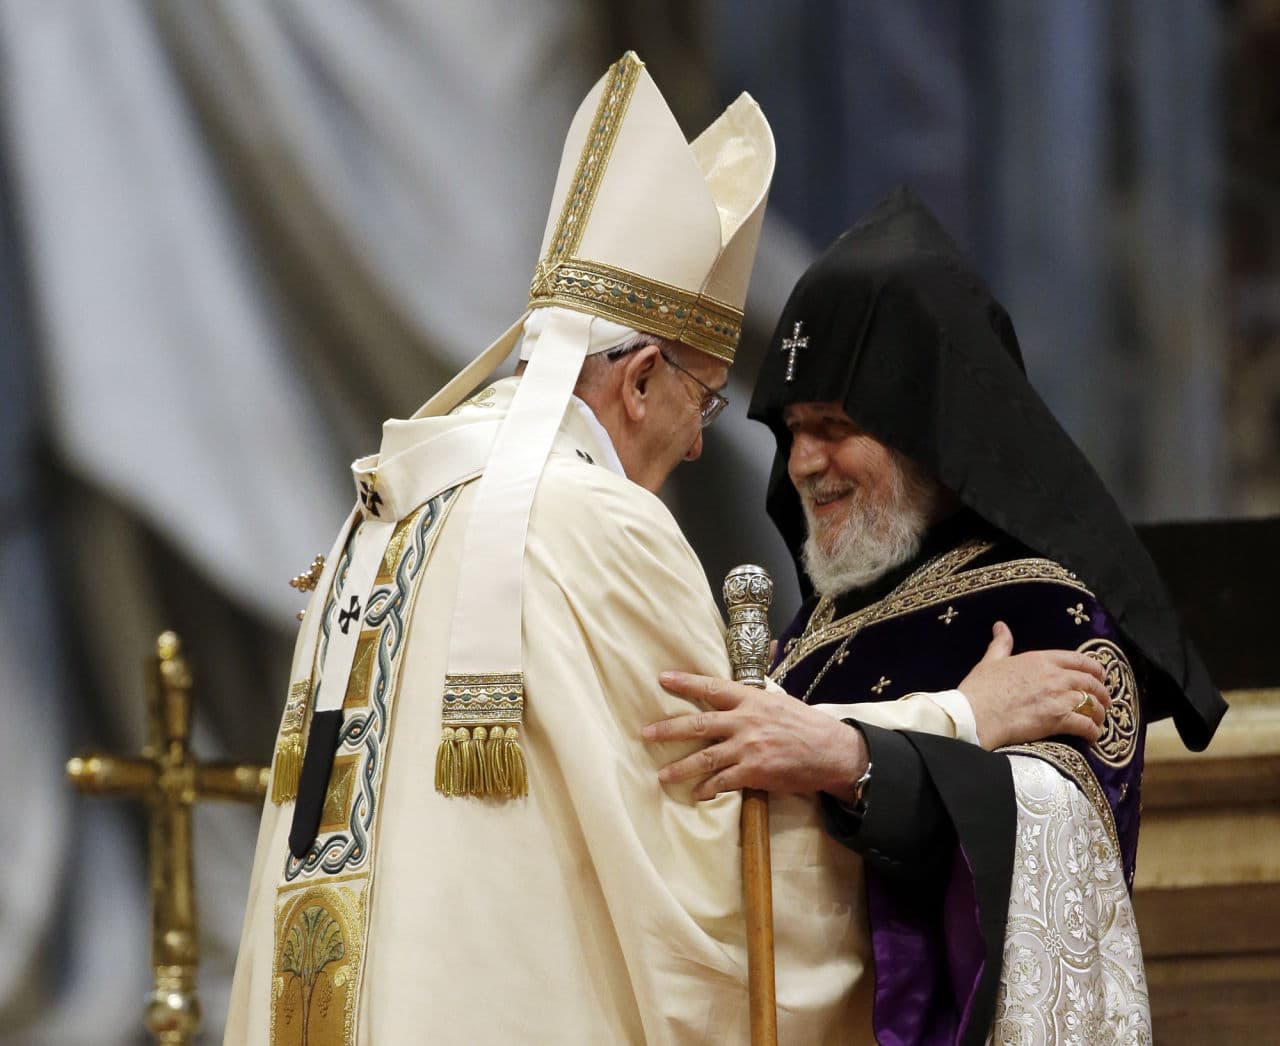 Pope Francis, left, is greeted by the head of Armenia's Orthodox Church Karekin II, during an Armenian-Rite Mass on the occasion of the commemoration of the 100th anniversary of the Armenian Genocide. (Gregorio Borgia/AP)